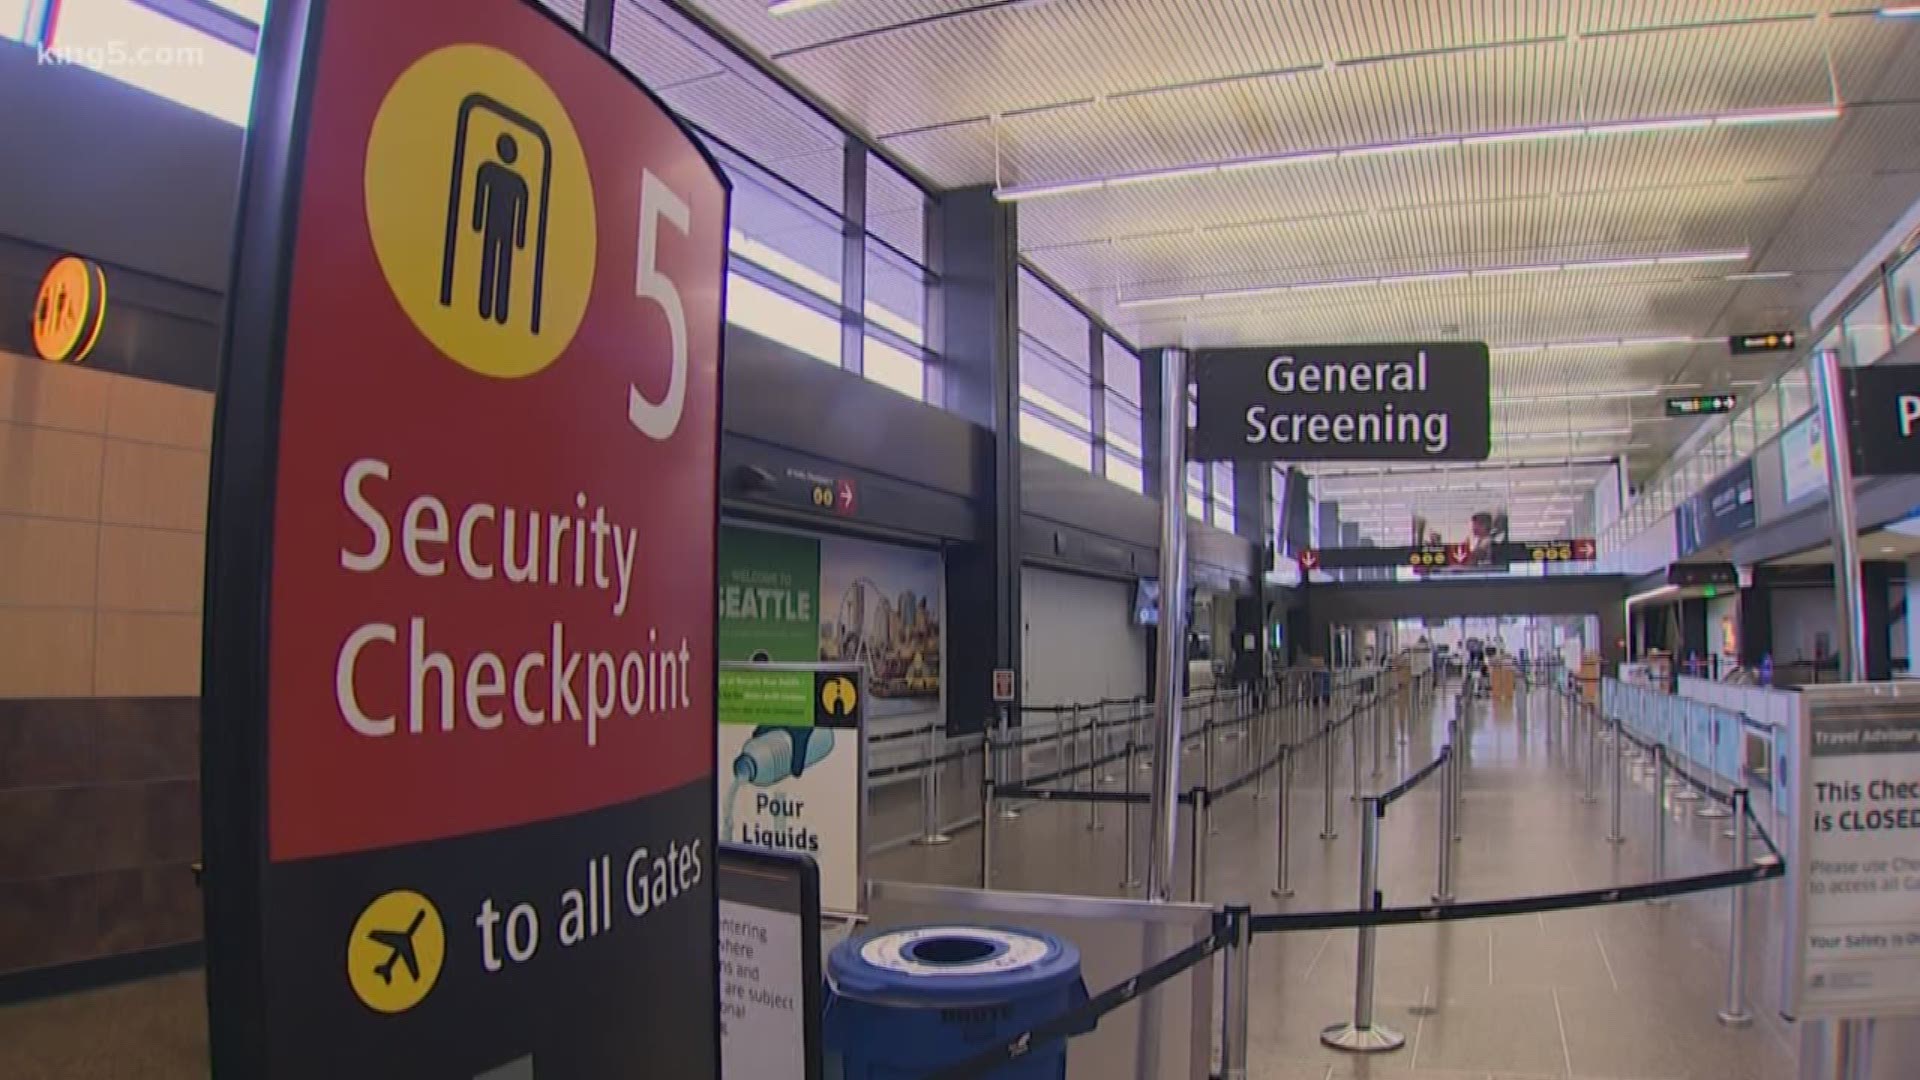 A TSA agent working at Sea-Tac International Airport has tested positive for the coronavirus, according to officials. The person is recovering at home.